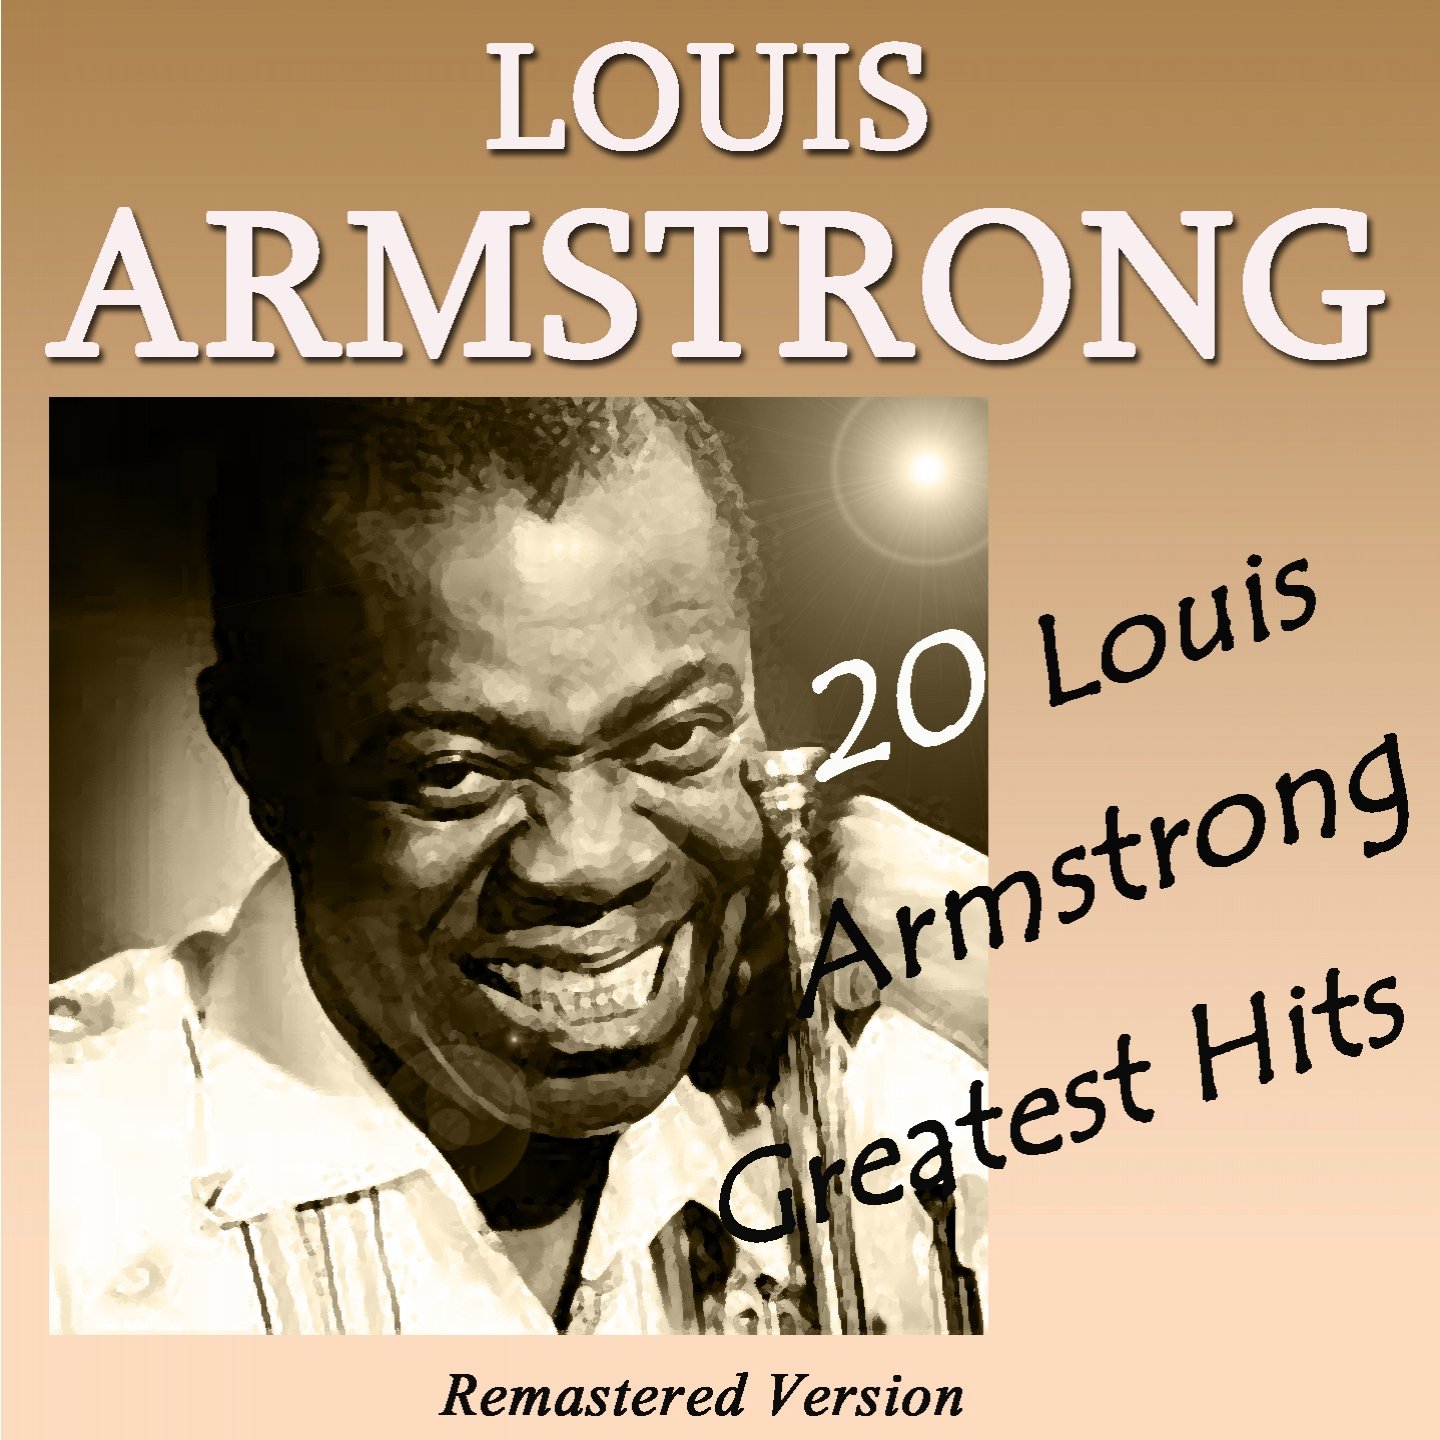 20 Louis Armstrong Greatest Hits (Remastered Version) - Louis Armstrong — Listen and discover ...